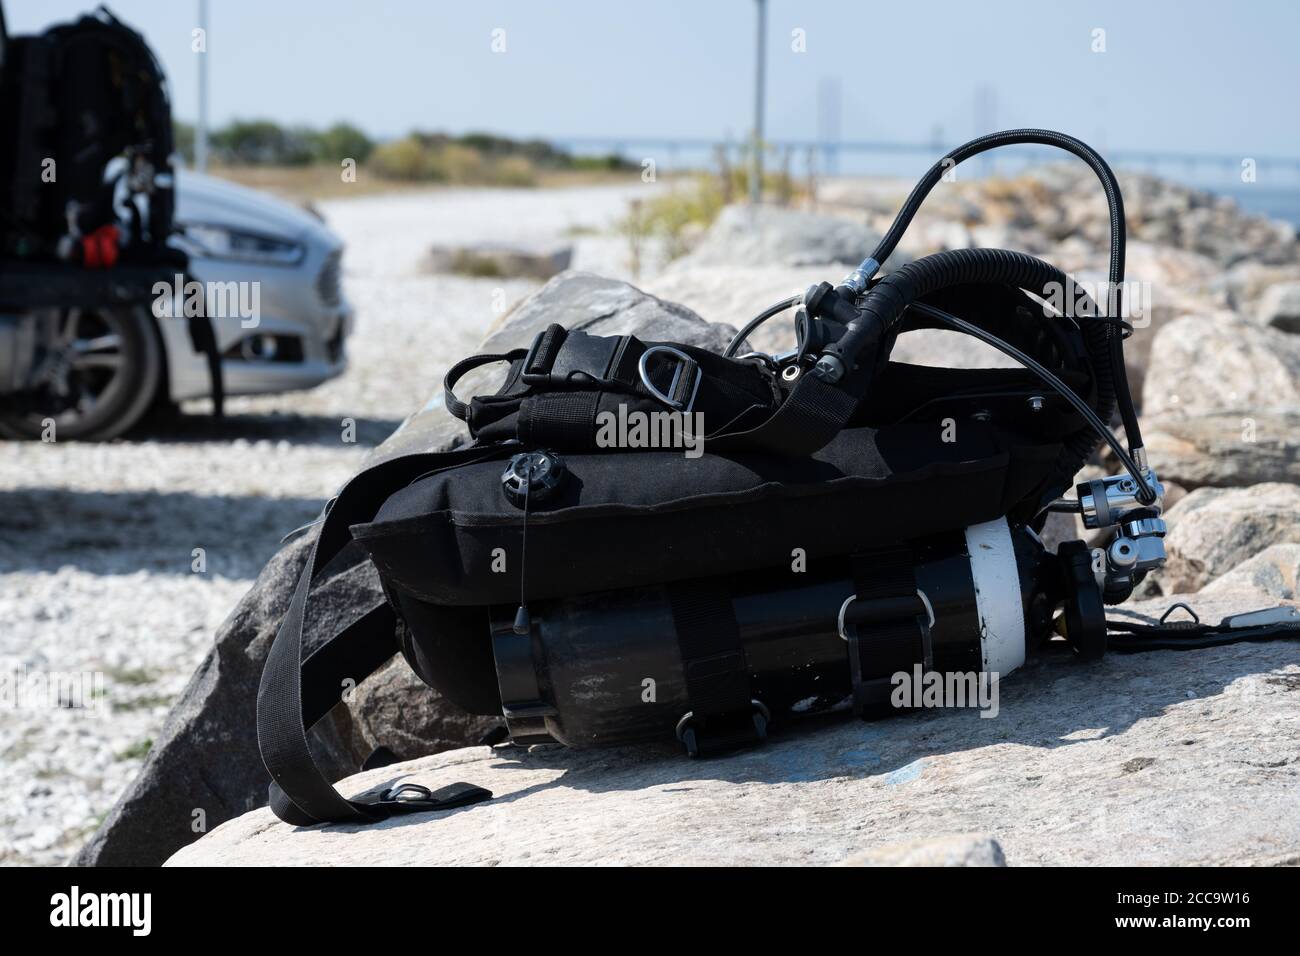 Scuba equipment on a stone. The Island, On in Swedish, is a very popular spot for scuba diving in Malmo Stock Photo